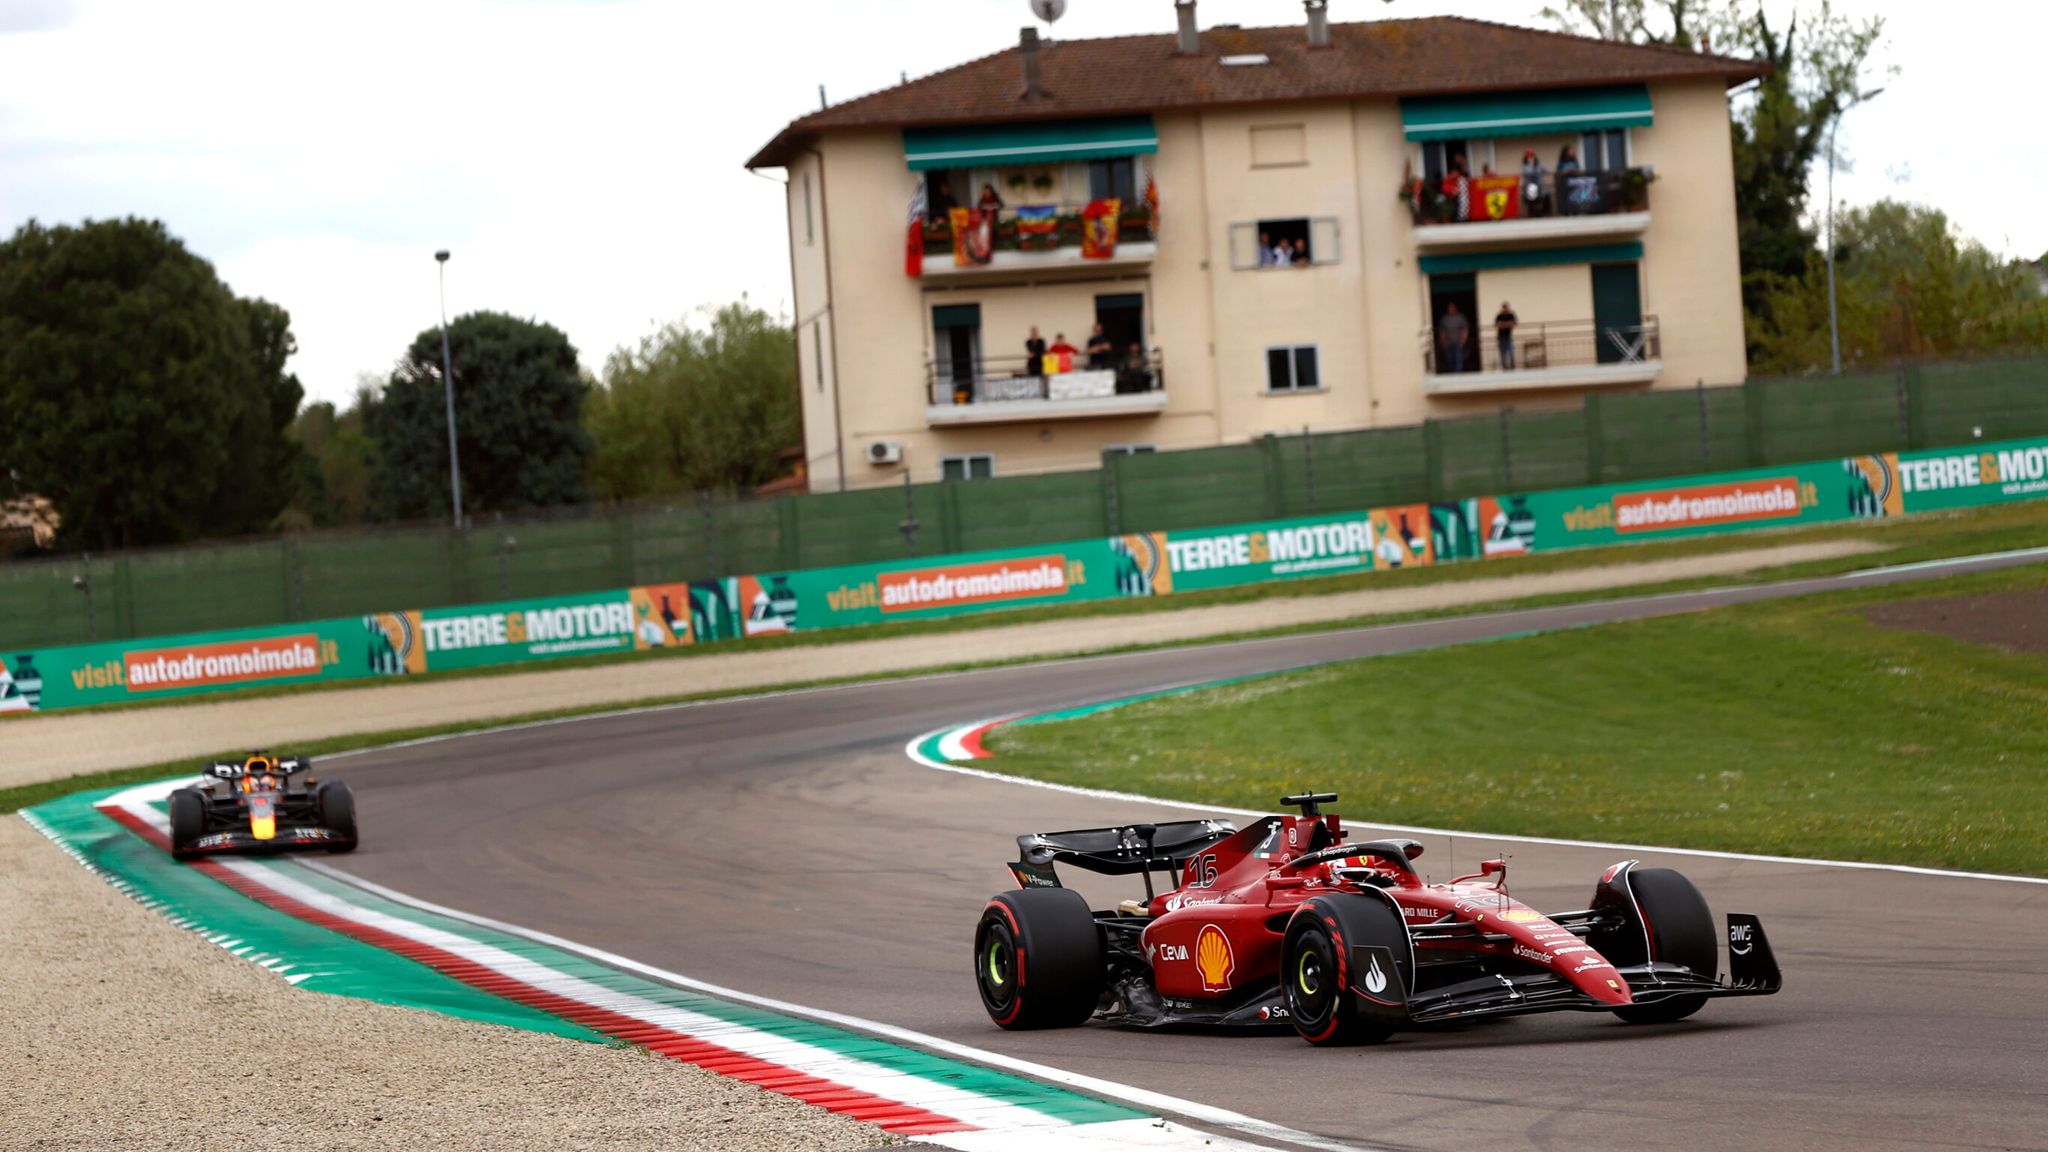 Italy works on keeping both Formula 1 races in calendar